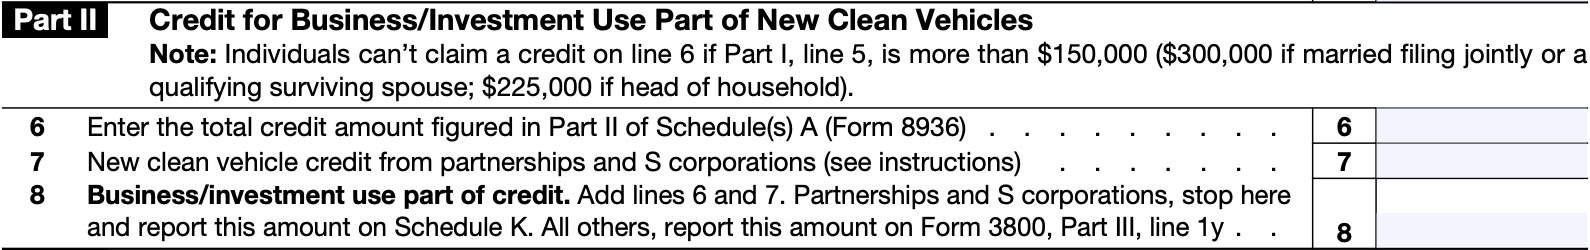 IRS Form 8936, part II: credit for business/investment use part of new clean vehicles